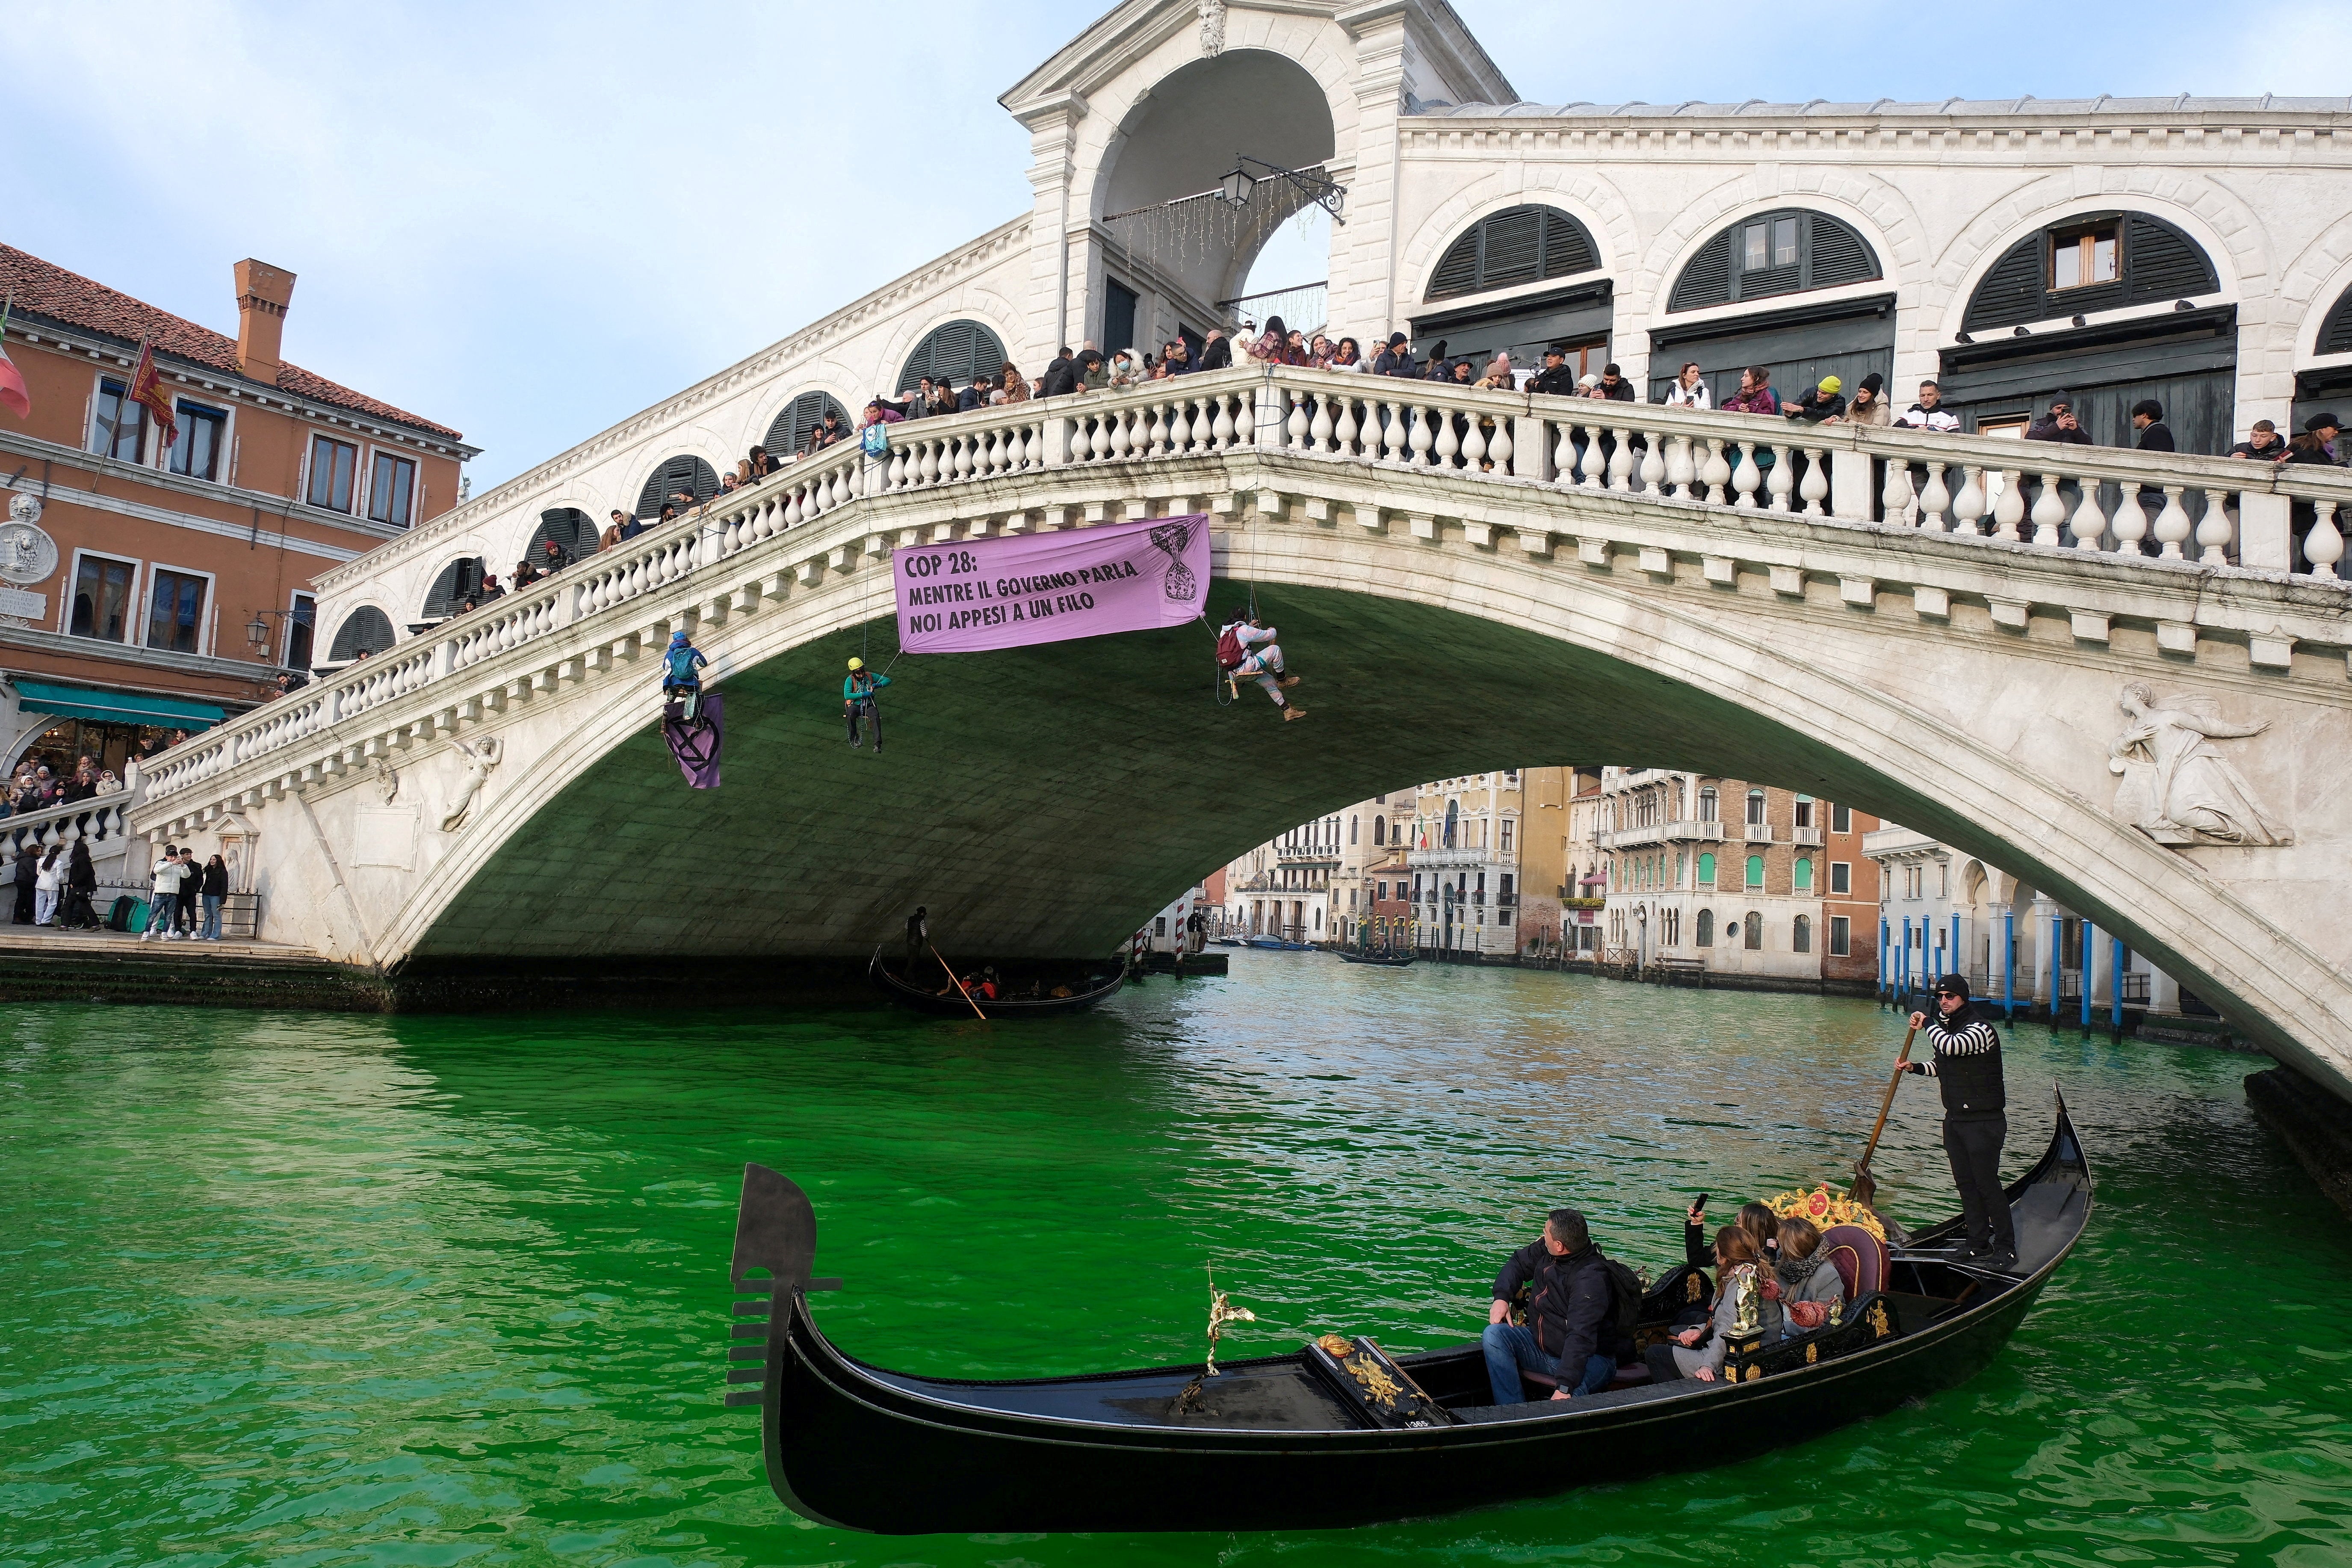 The Grand Canal was dyed fluorescent green